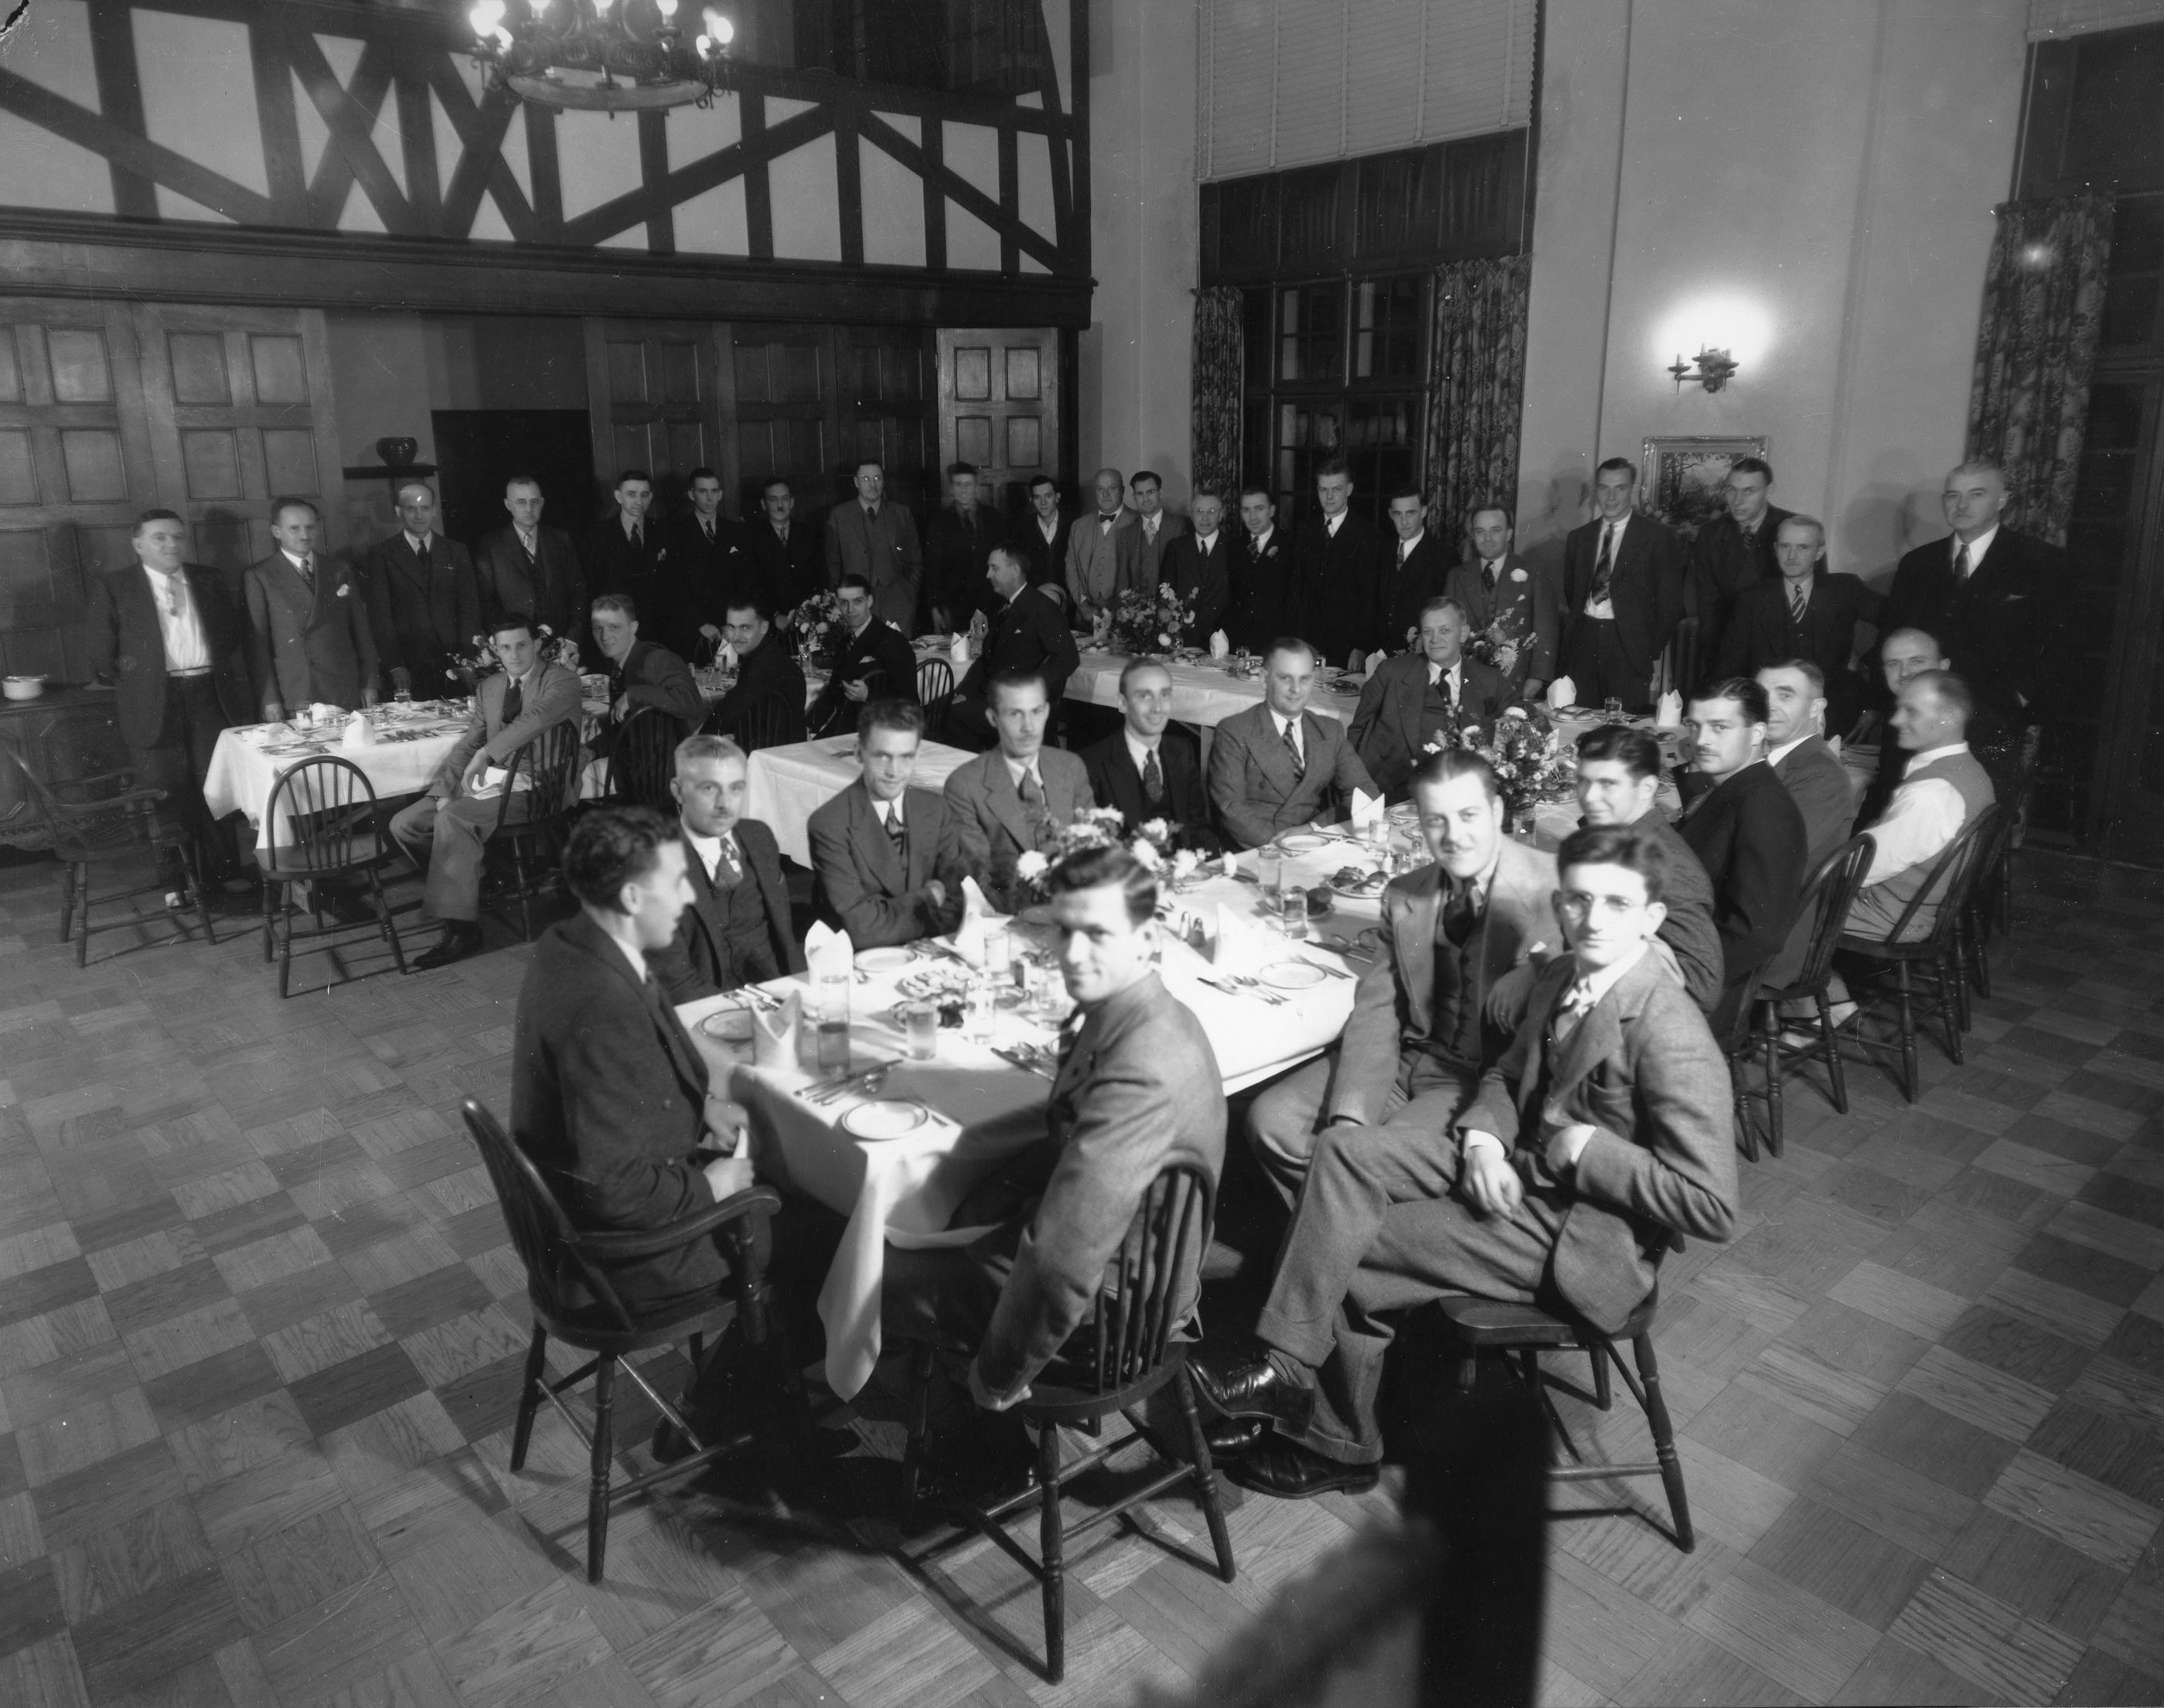 Historical black and white photograph depicting a group of distinguished men in formal attire seated around tables at a large banquet hall, seated and standing, staring directly into the camera, suggesting a formal event or gathering from an earlier era. It is almost as if we are interrupting an important meeting.